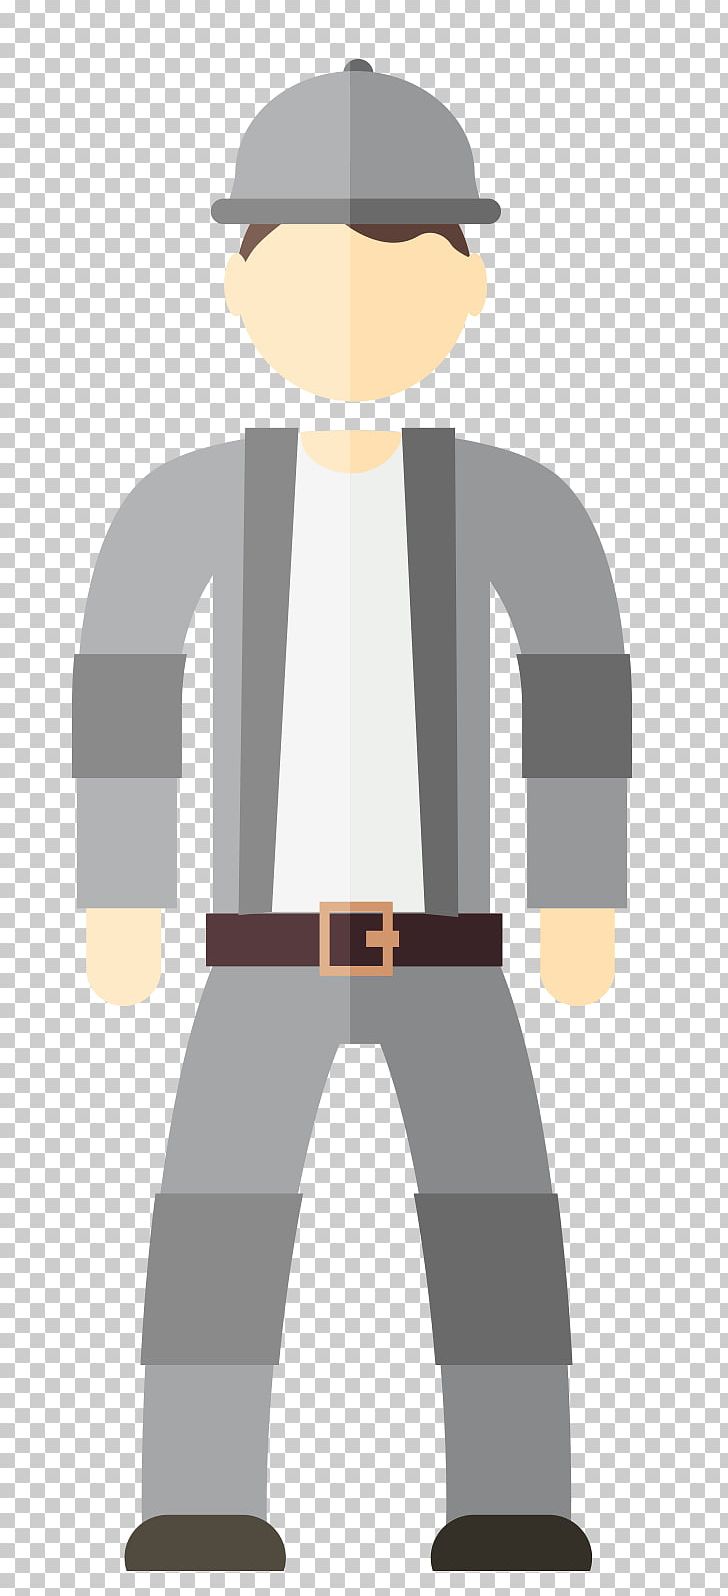 Adobe Illustrator PNG, Clipart, Angle, Business Man, Cartoon, Construction Worker, Encapsulated Postscript Free PNG Download